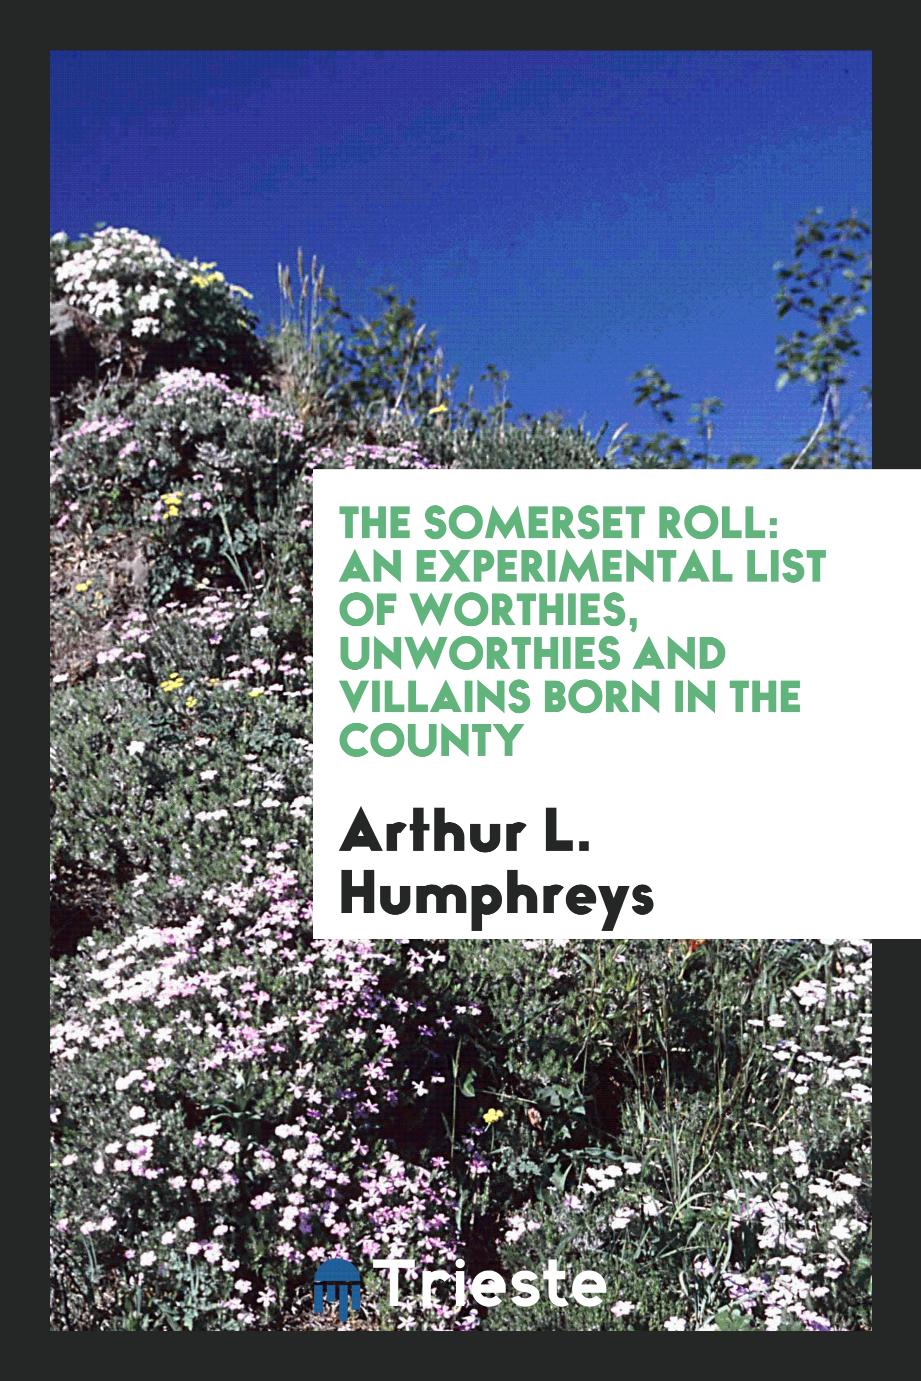 The Somerset Roll: An Experimental List of Worthies, Unworthies and Villains Born in the County